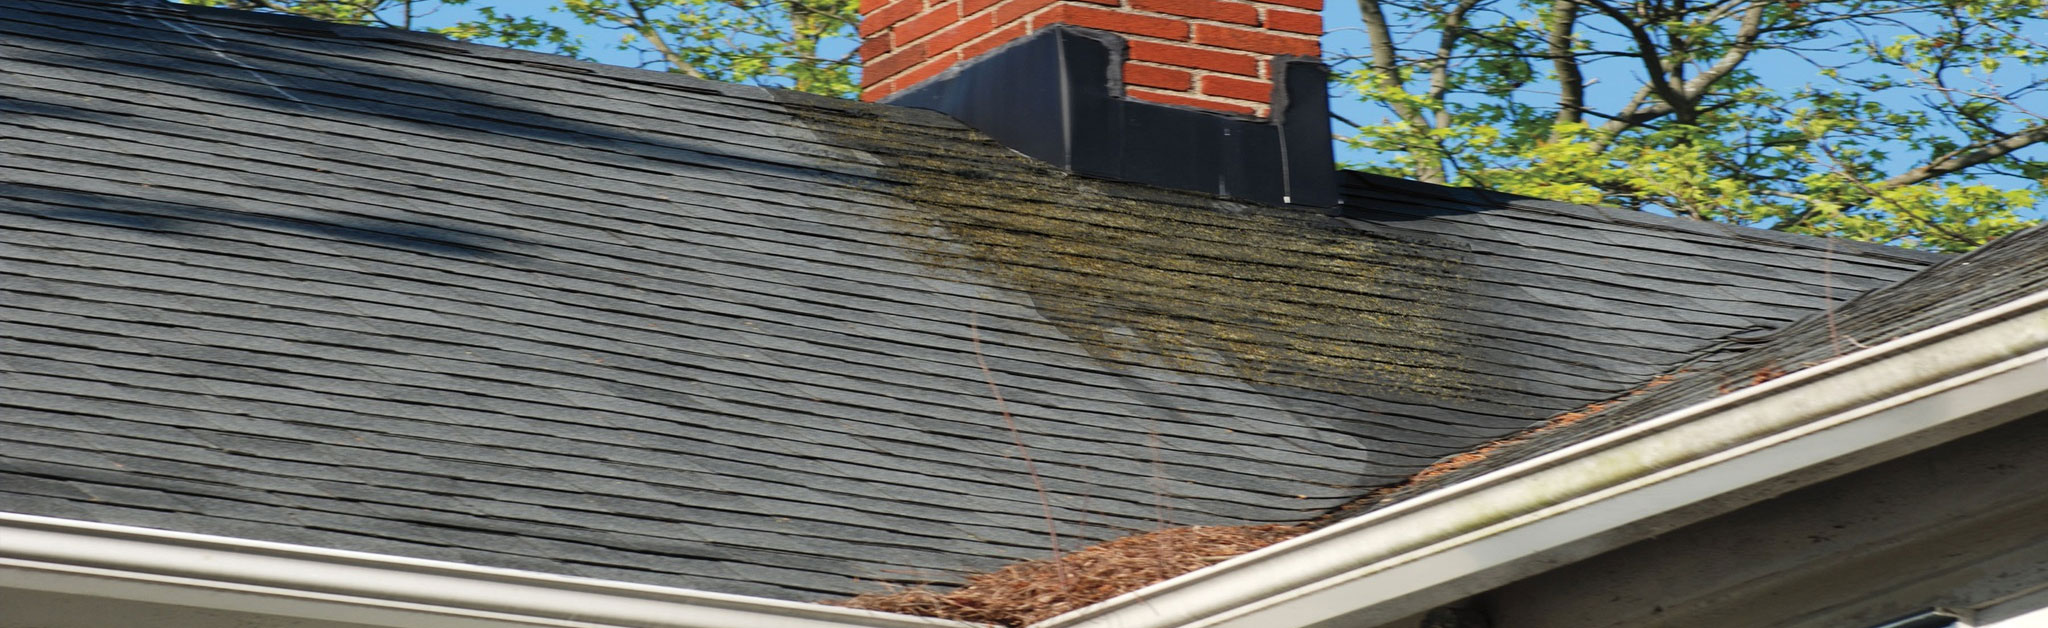 Adams Roofing Images